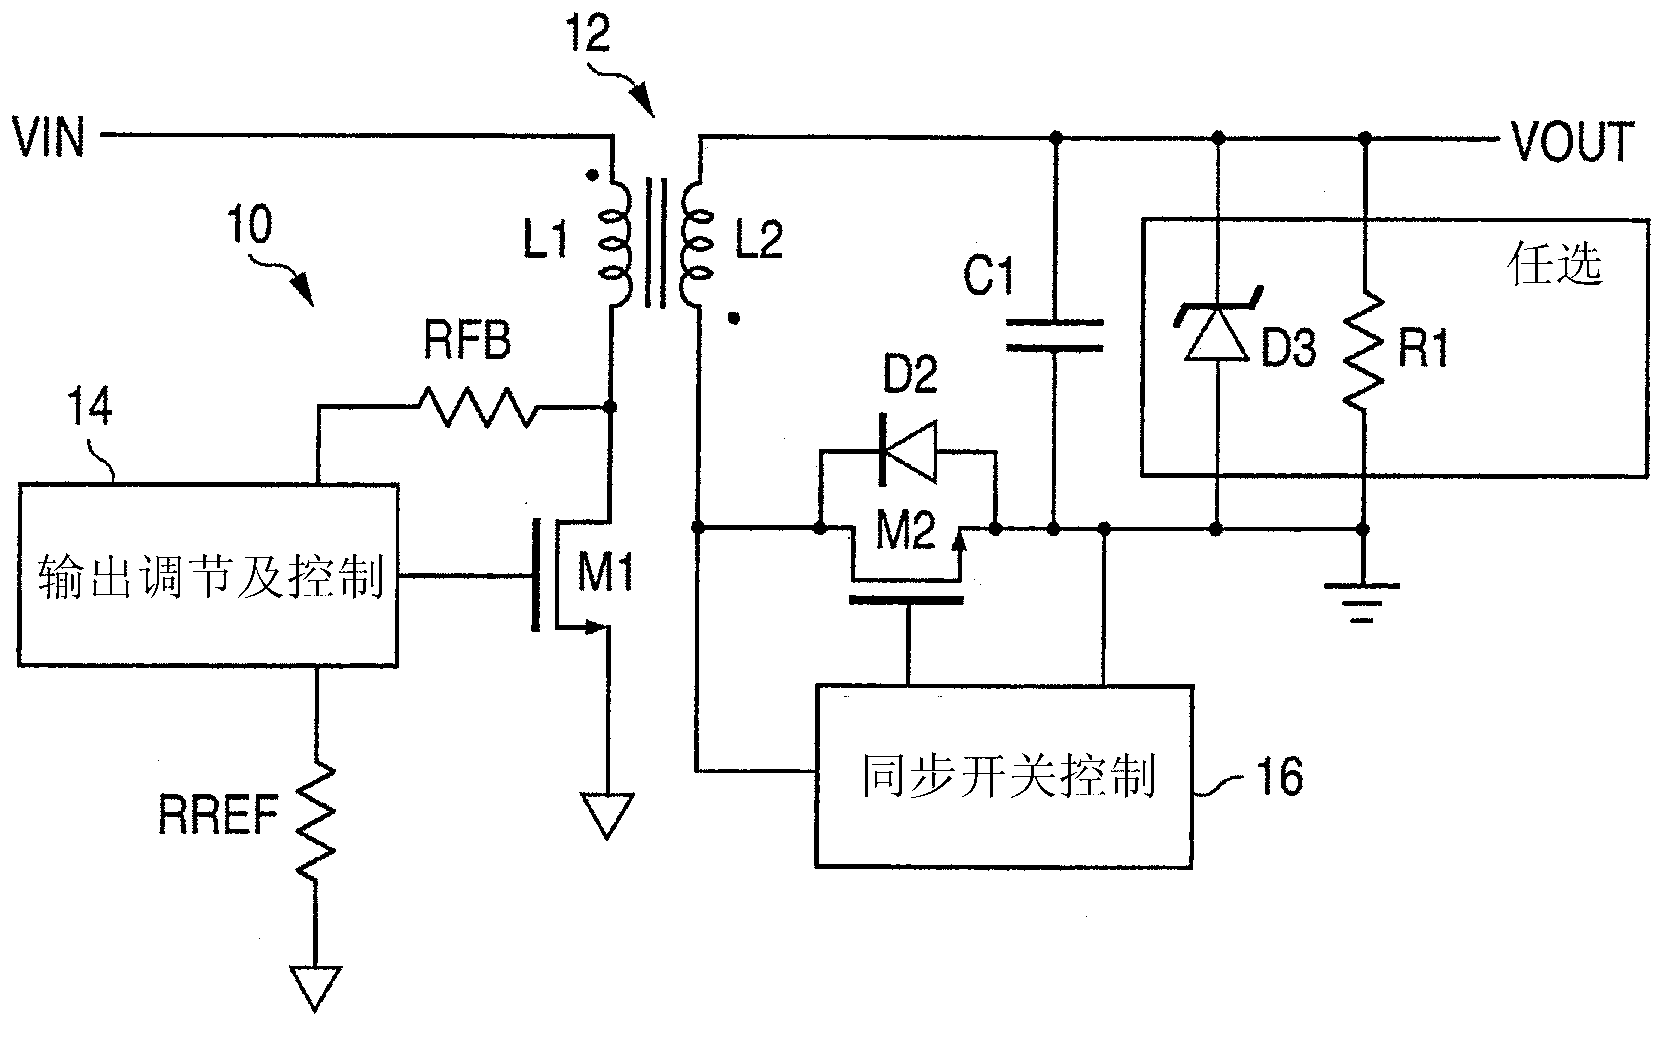 Flyback converter with primary side voltage sensing and overvoltage protection during low load operation